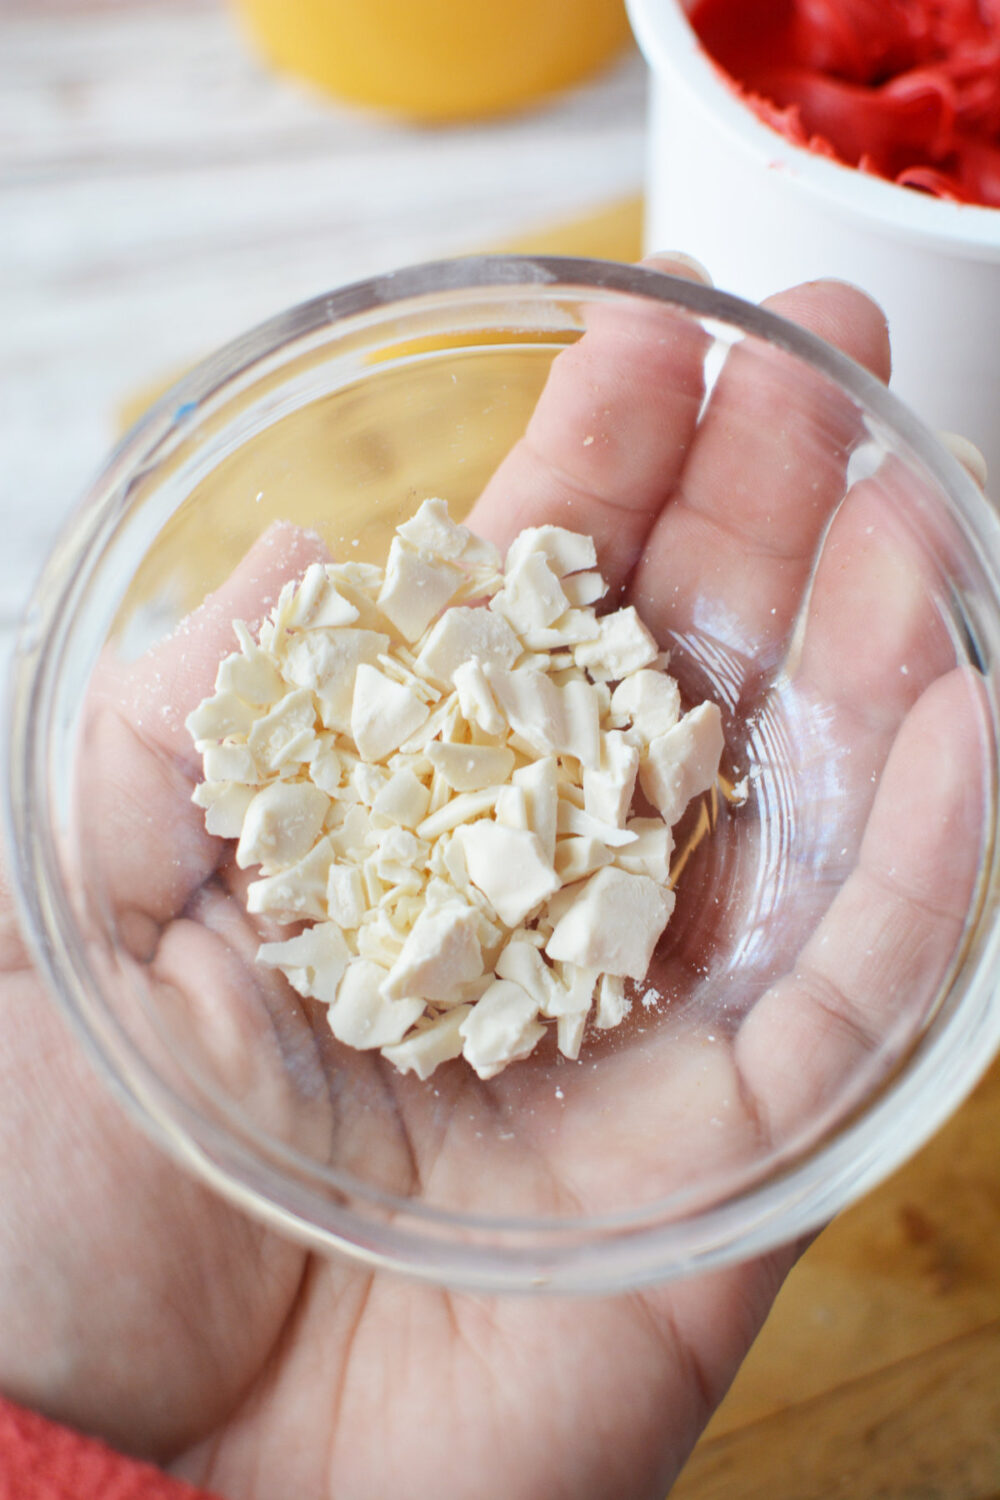 Crushed white candy melts in a bowl.